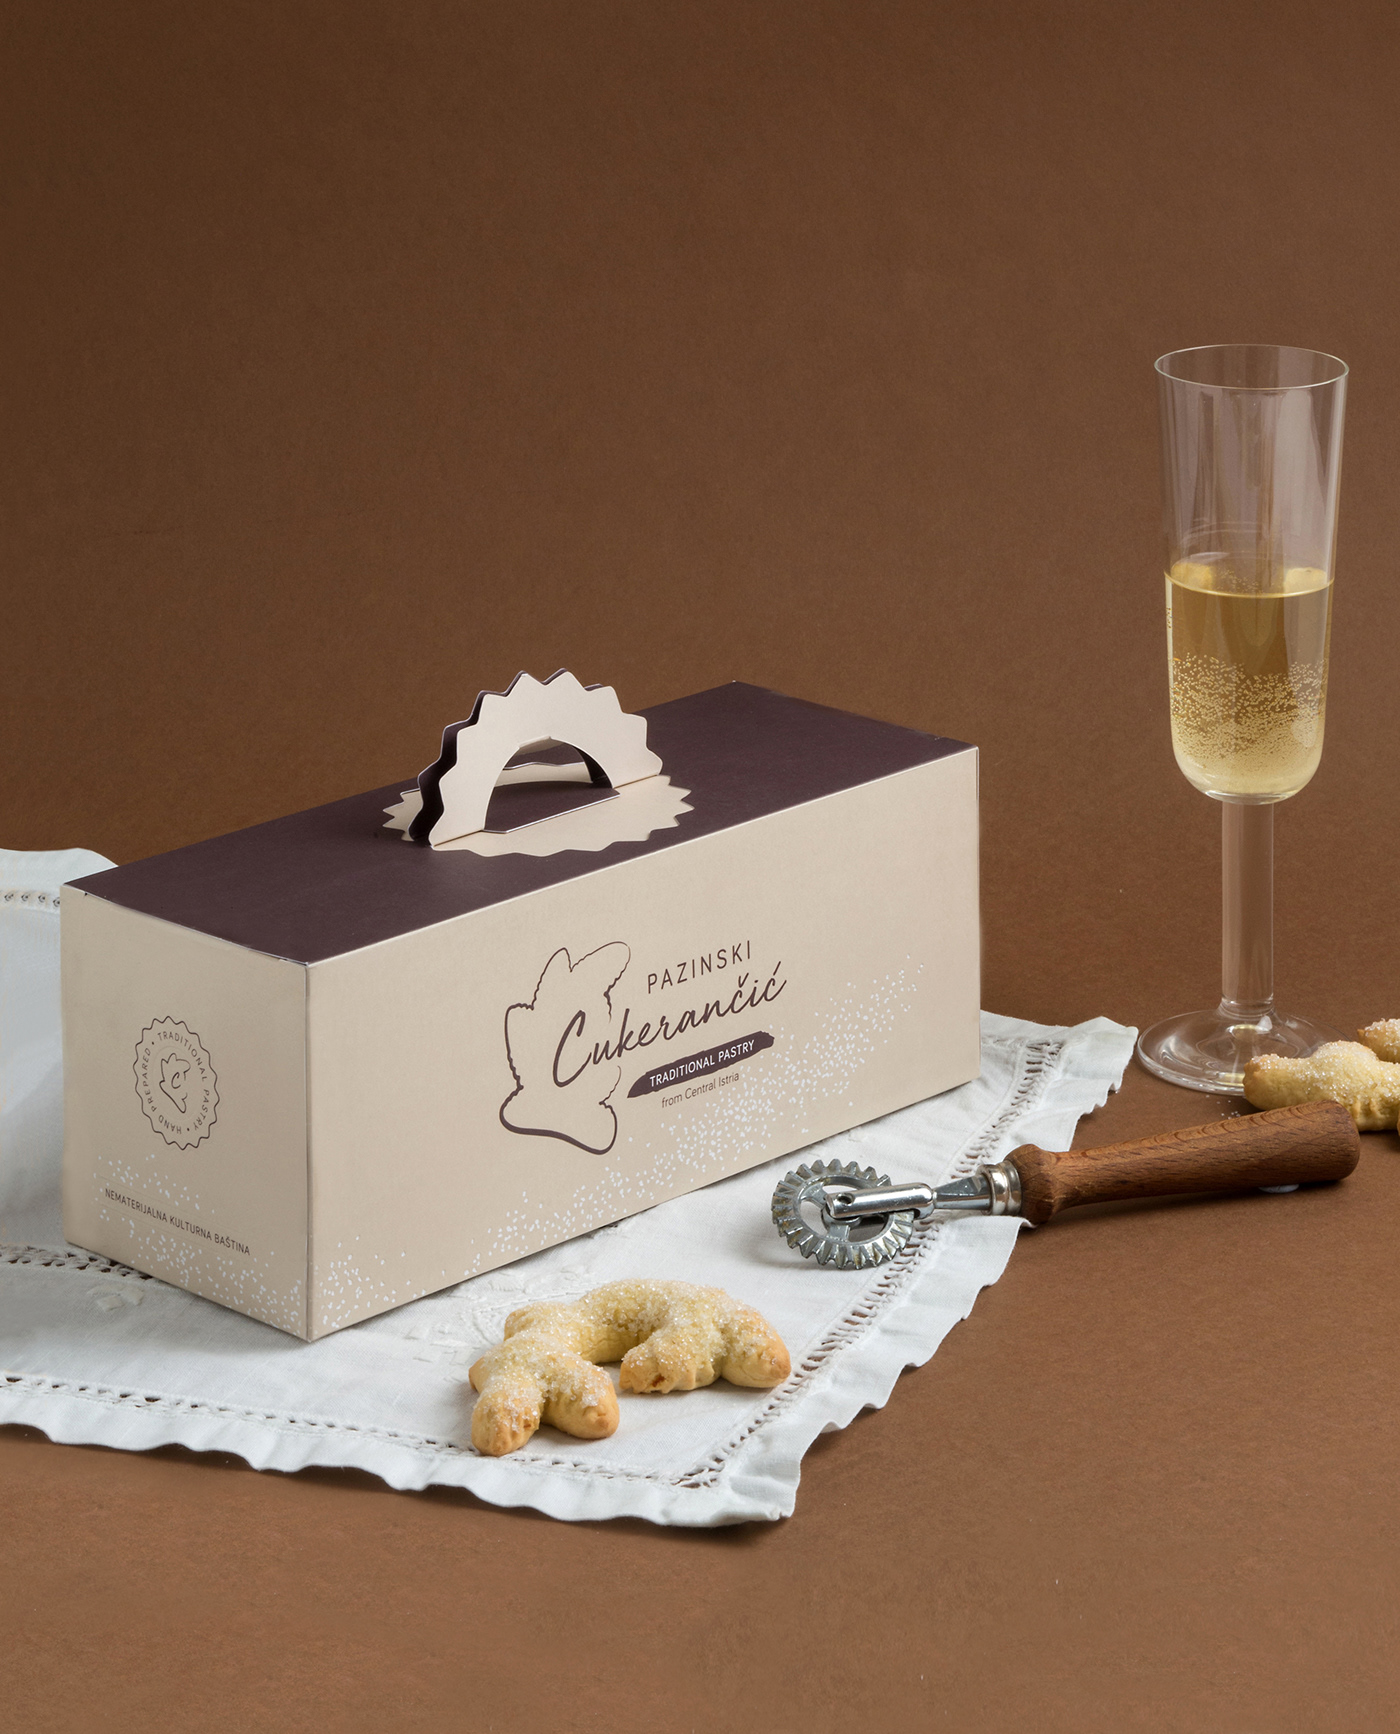 cultural delicacy gastronomy heritage intangible istria Packaging Sweets tradition